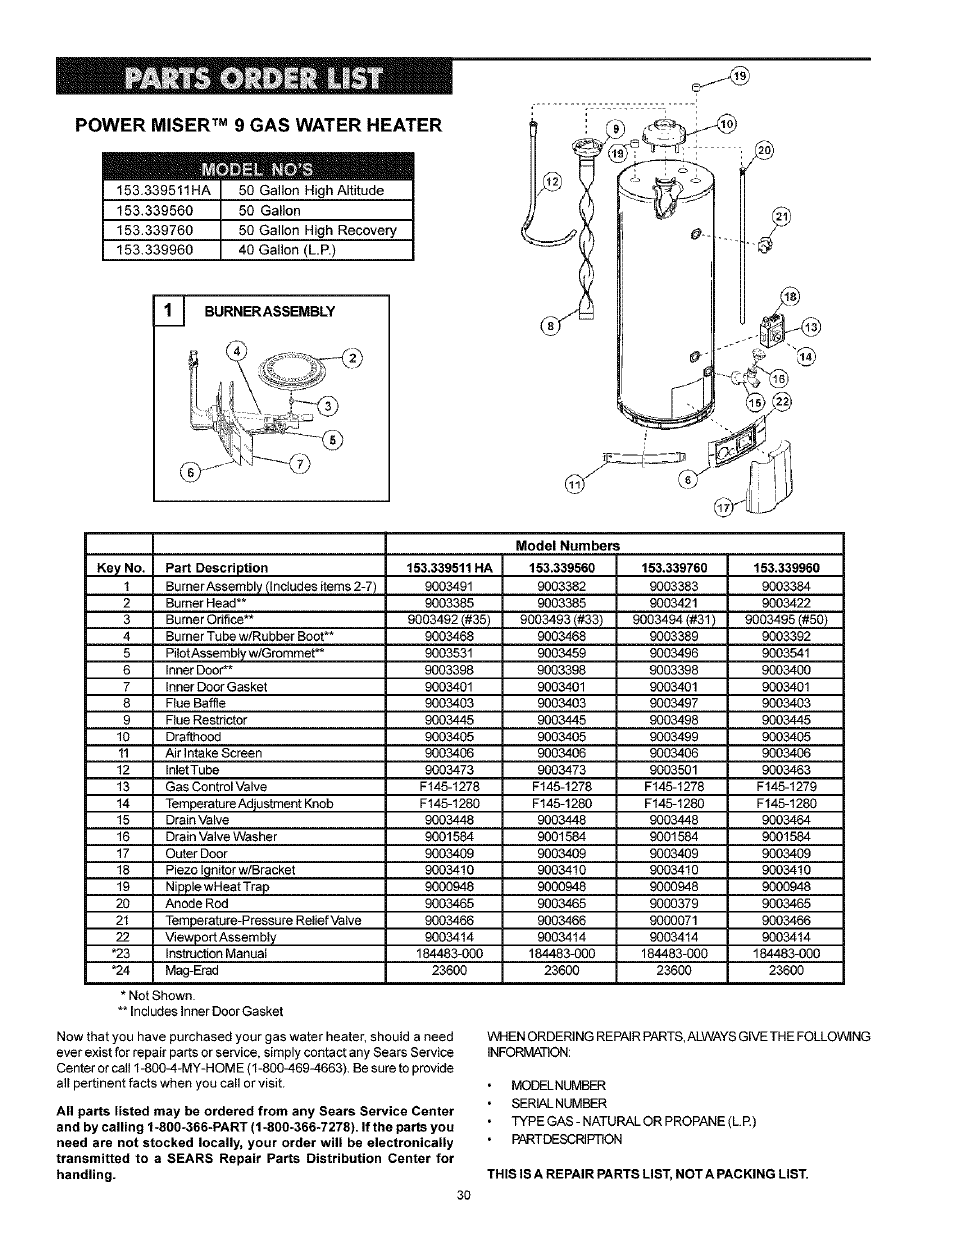 Power miser™ 9 gas water heater, This is a repair parts list, not a packing list | Kenmore POWER MISER 153.33926 User Manual | Page 30 / 32